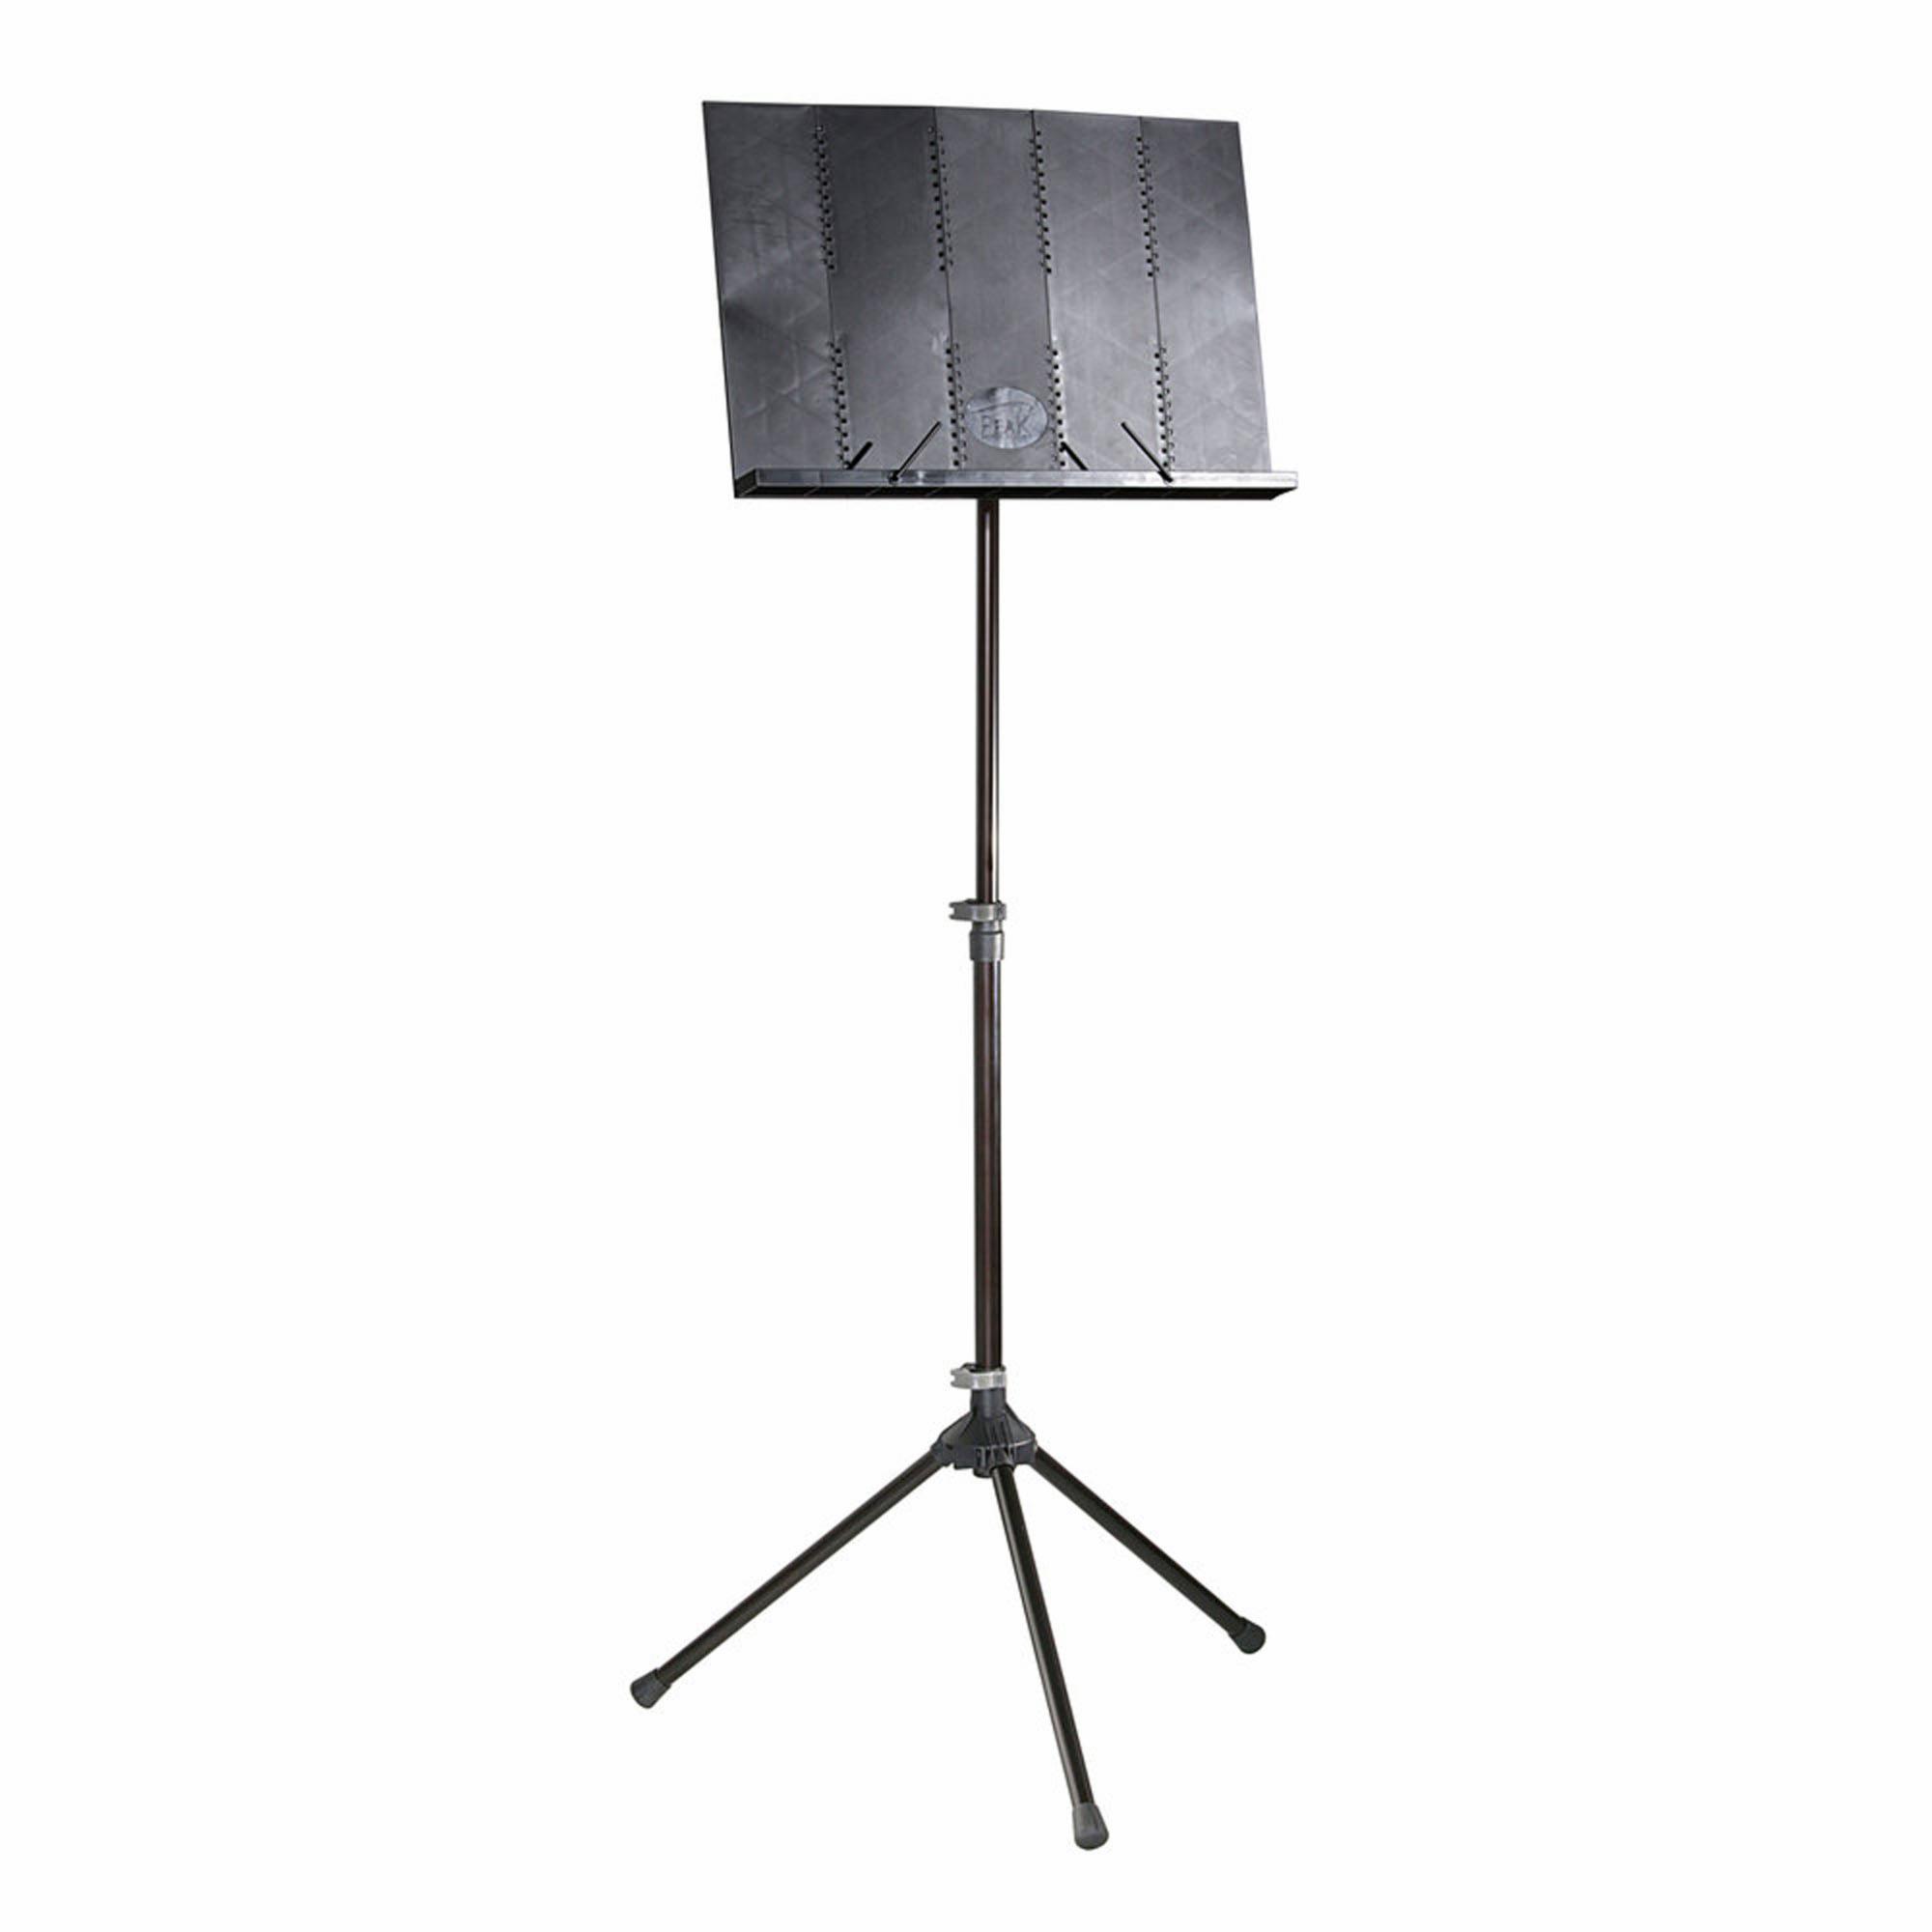 Peak SMS-40 Two Section Aluminum Music Stand